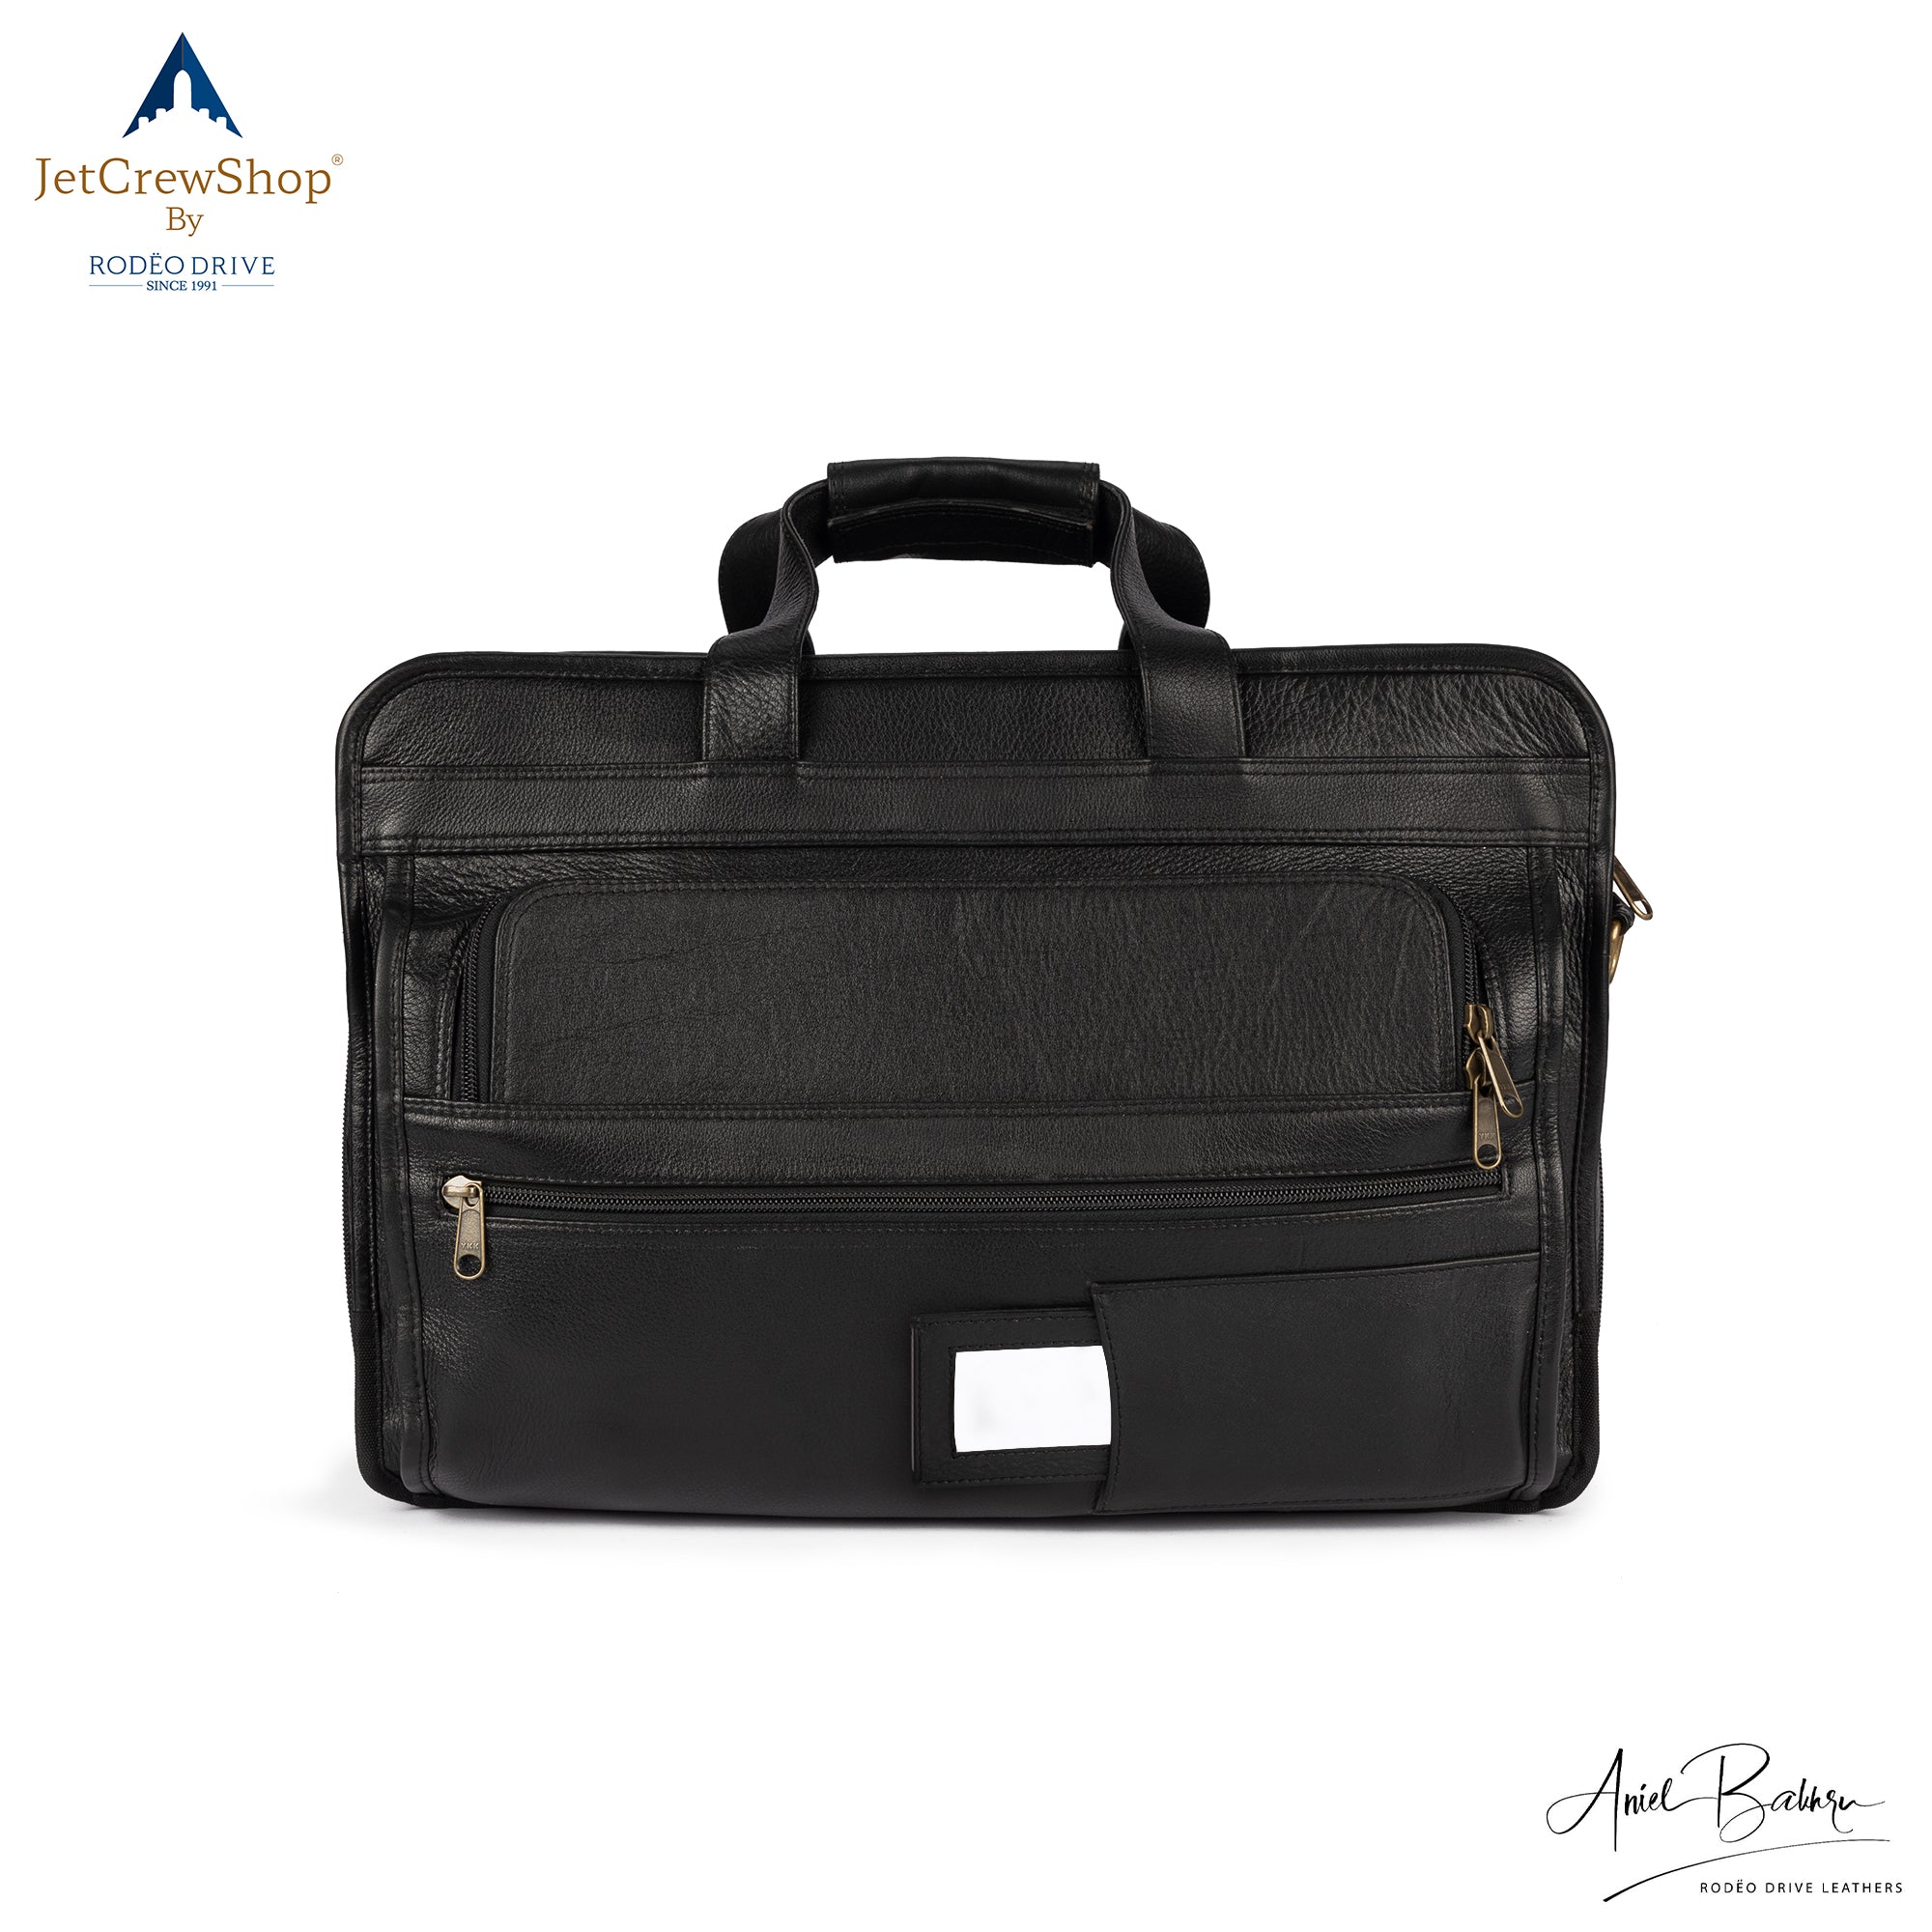 Front view of PAPERLESS AIRSIDE PILOT BAG. Bottom compartment easily carry your mobile or electronic devices